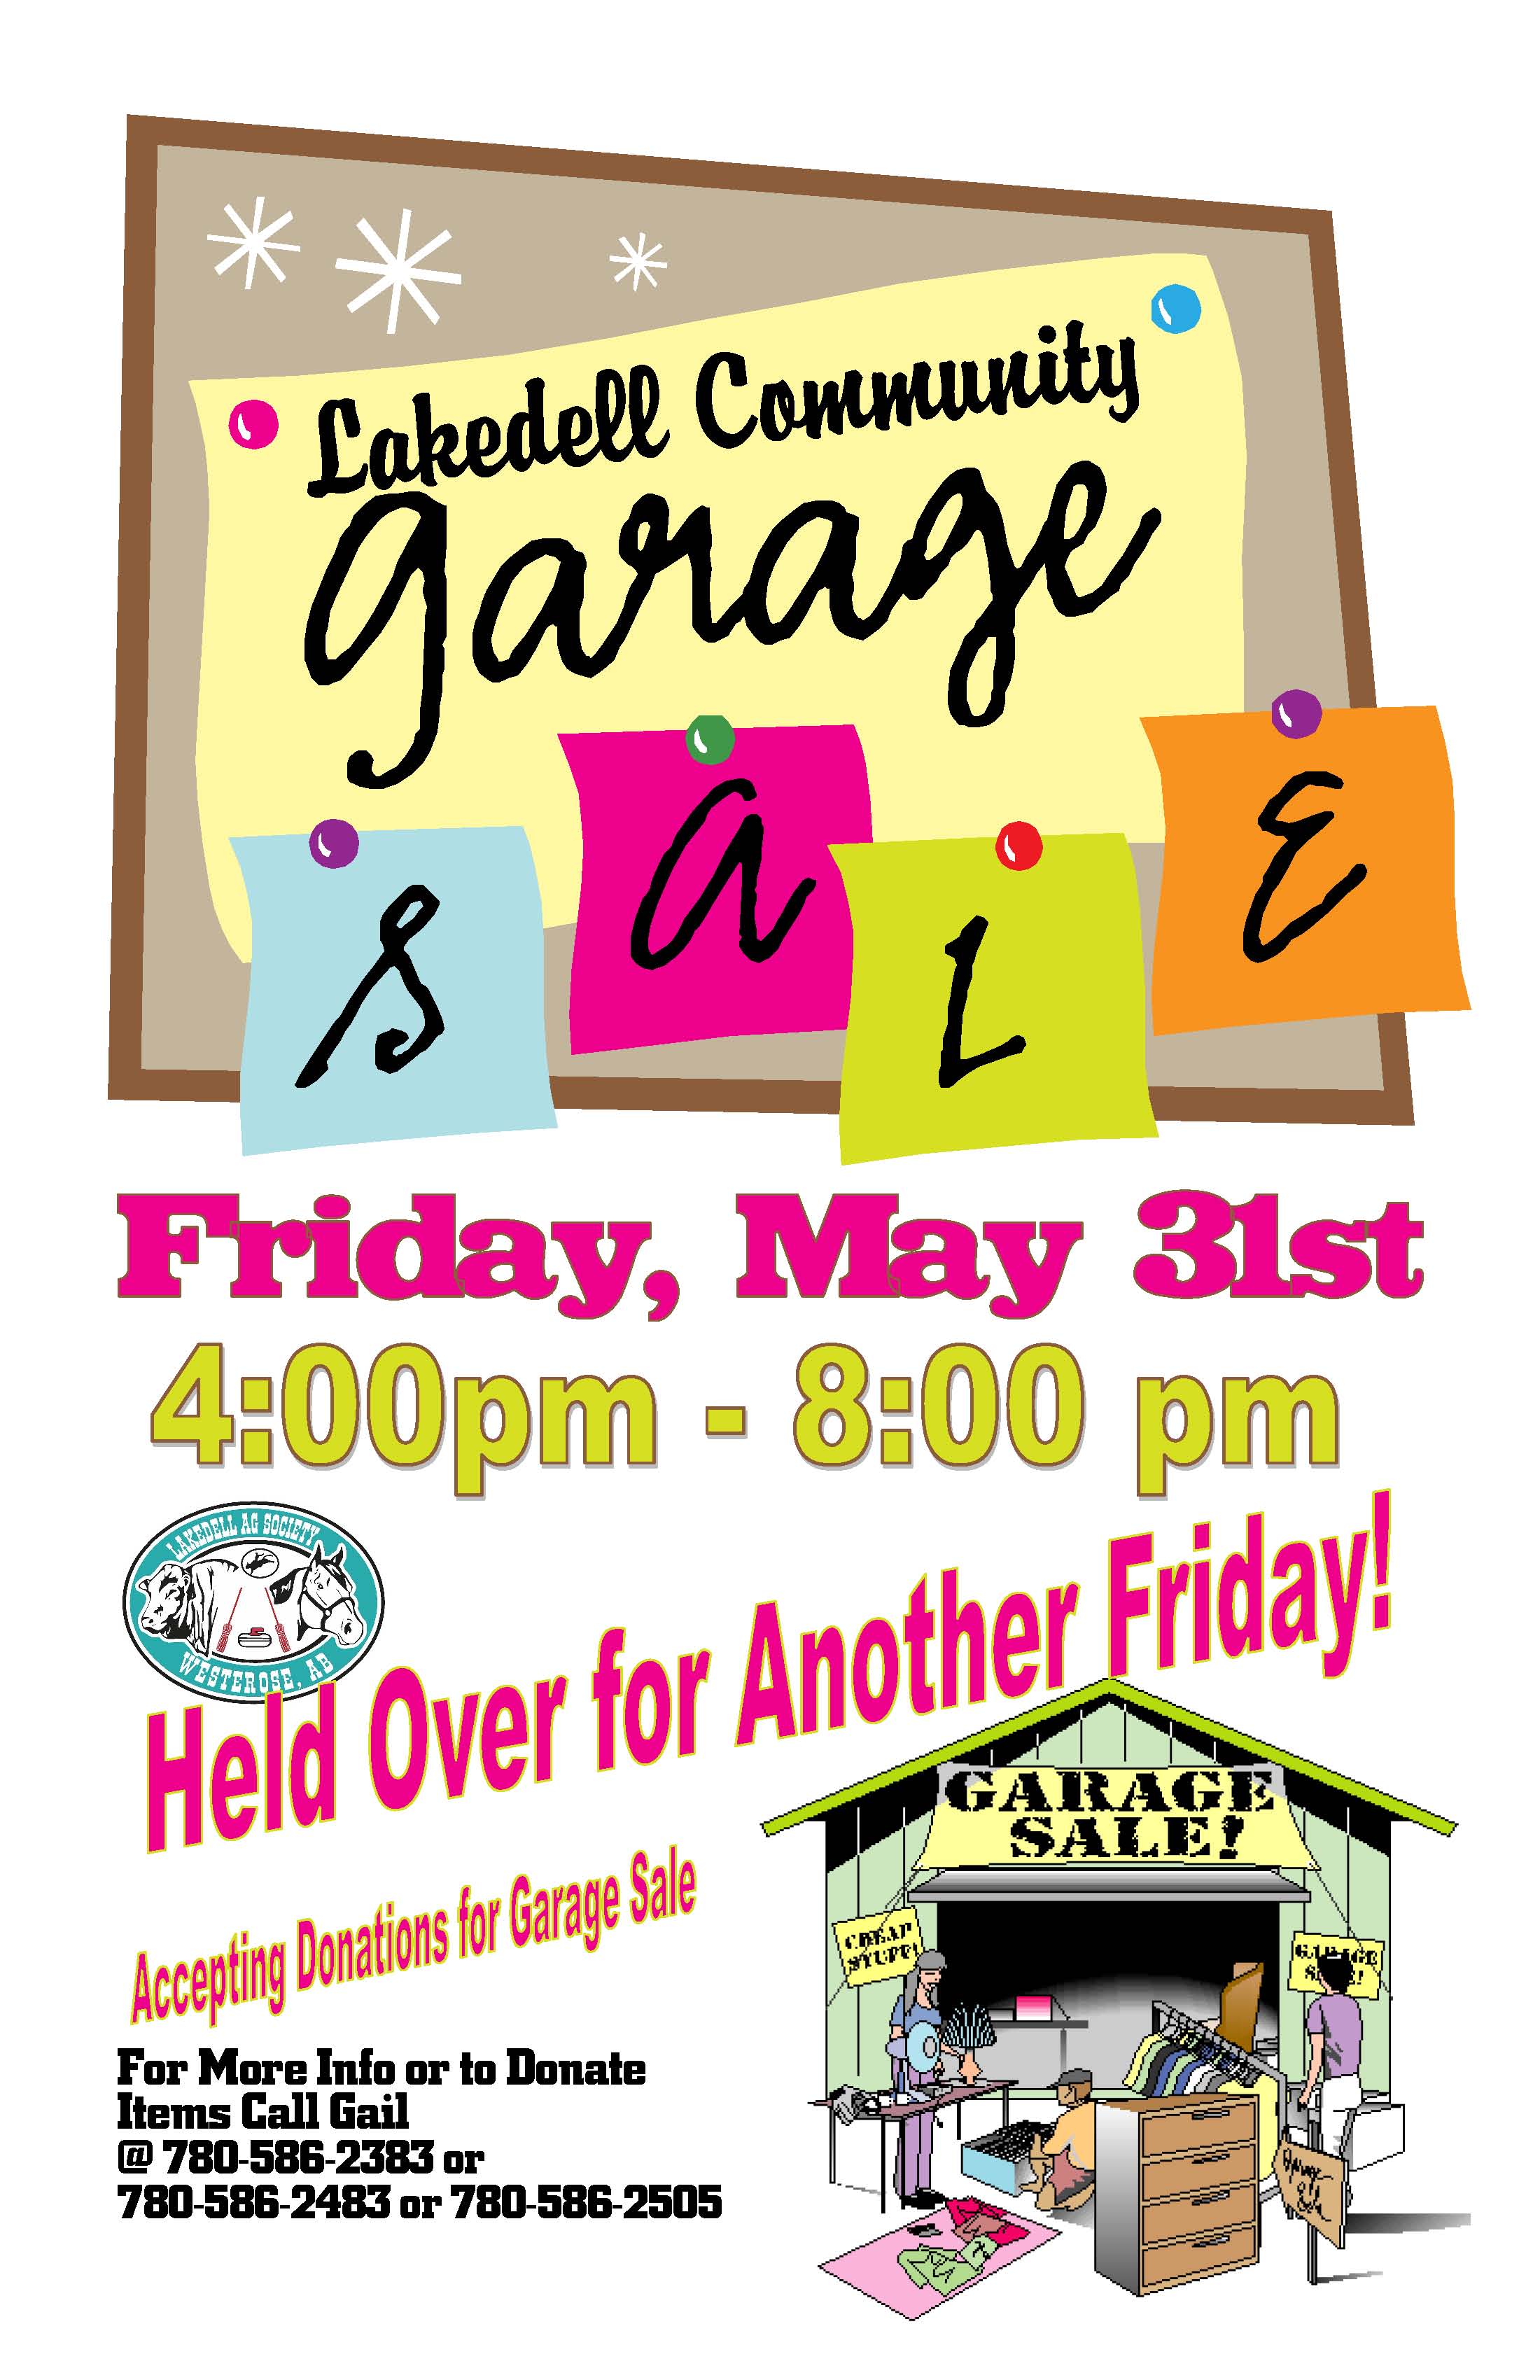 garagesale and find replace causes program to freeze